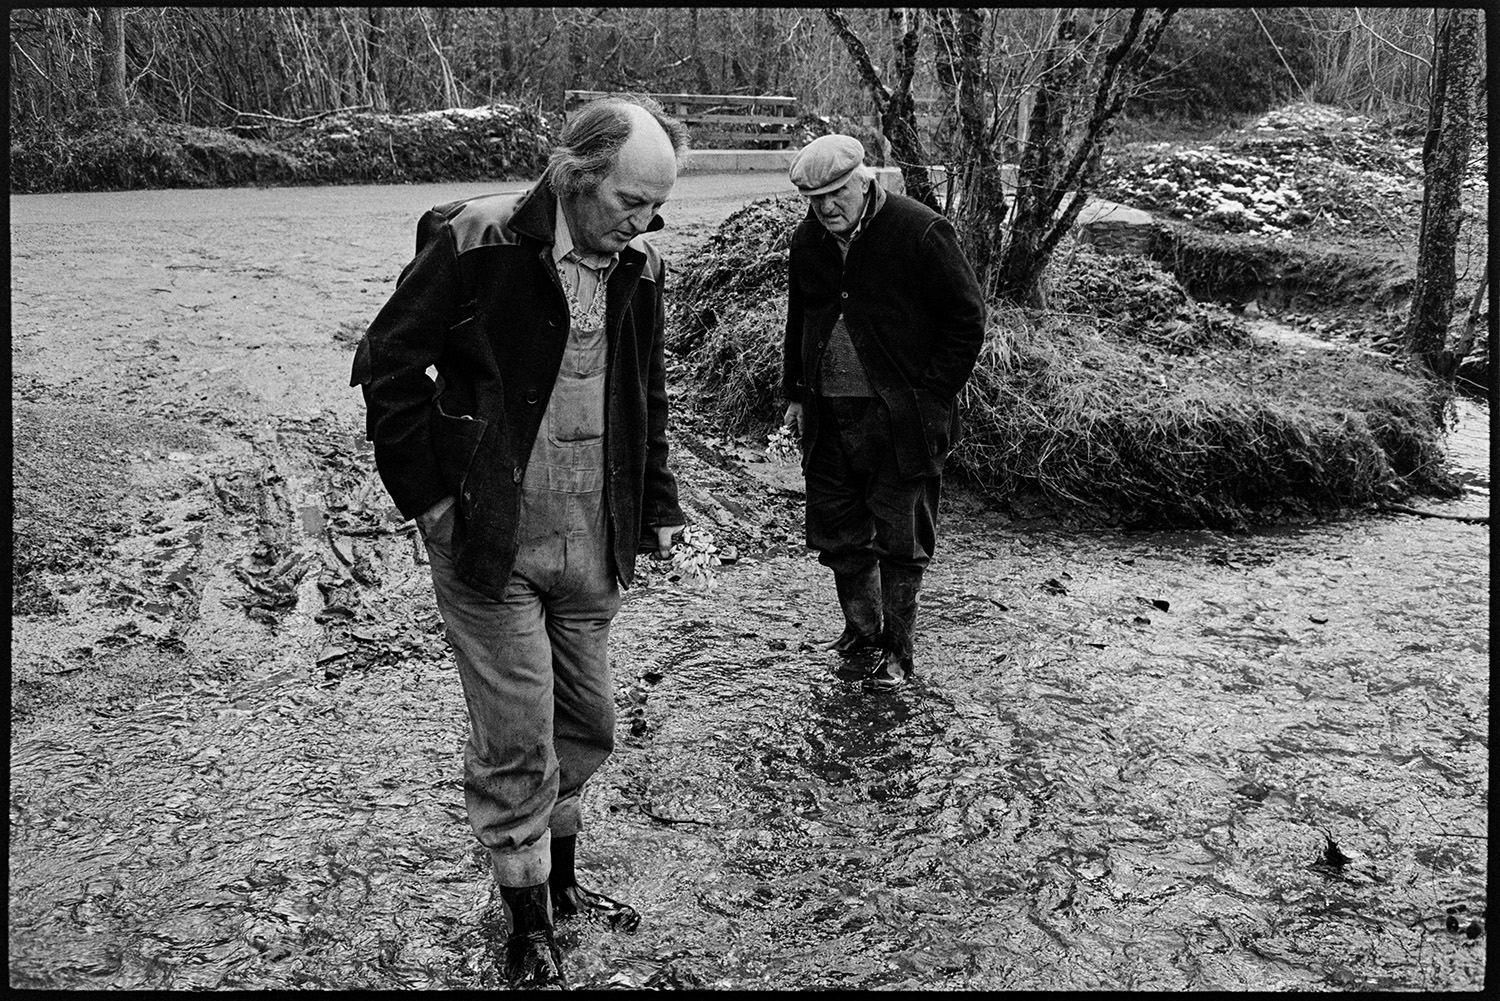 Two men with snowdrops, father and son, standing in stream. 
[Michael Mitchell and his father Lloyd Mitchell walking through a stream at Addisford, Dolton. They are both holding a bunch of snowdrops.]